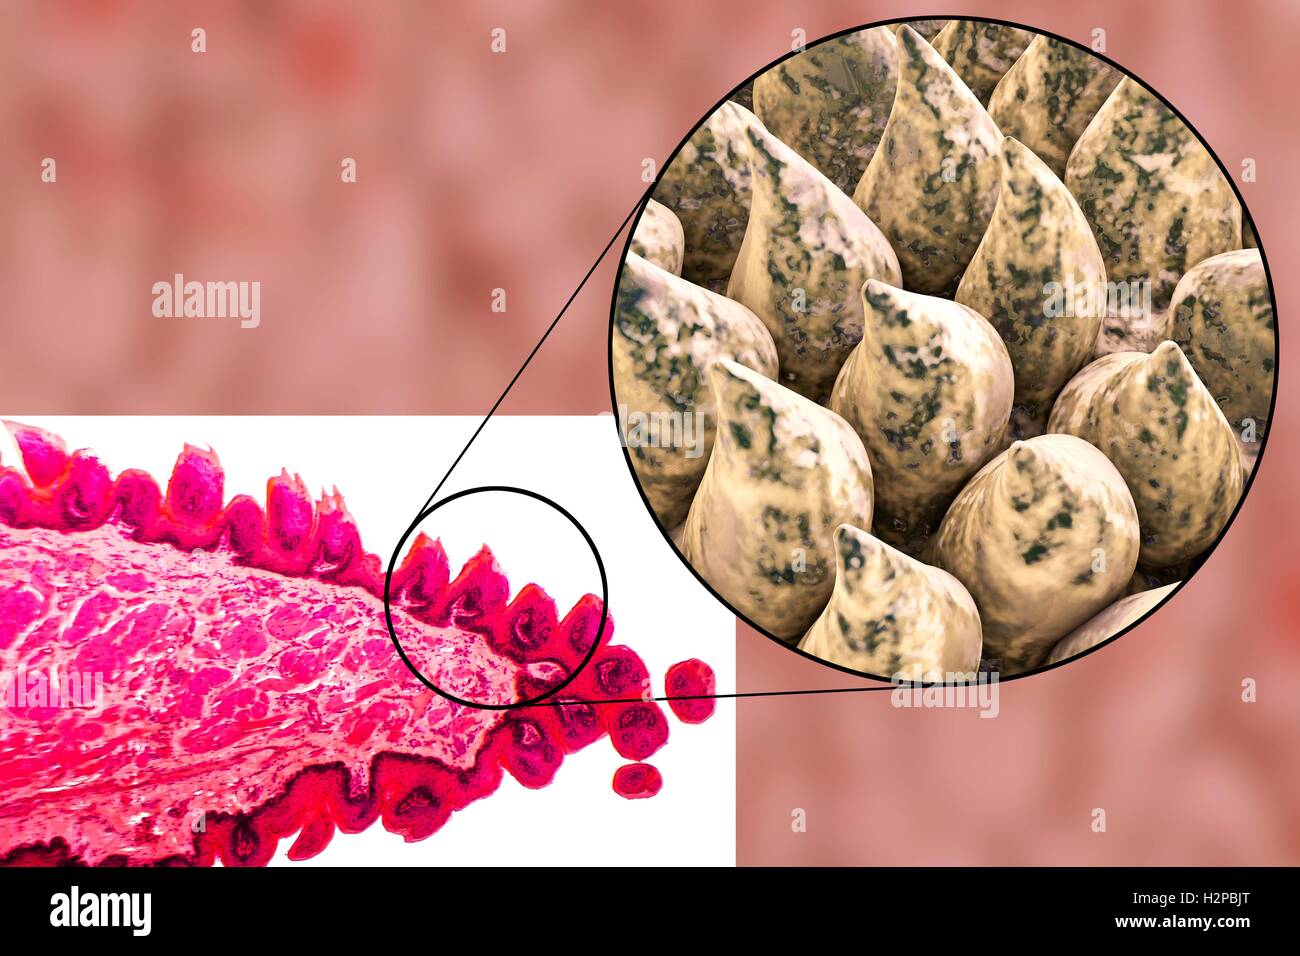 Tongue surface, light micrograph and computer illustration. Filiform papillae (cone-shaped) on the surface of the tongue. Filiform papillae contain nerve endings that transmit tactile (touch) information to the brain. Stock Photo